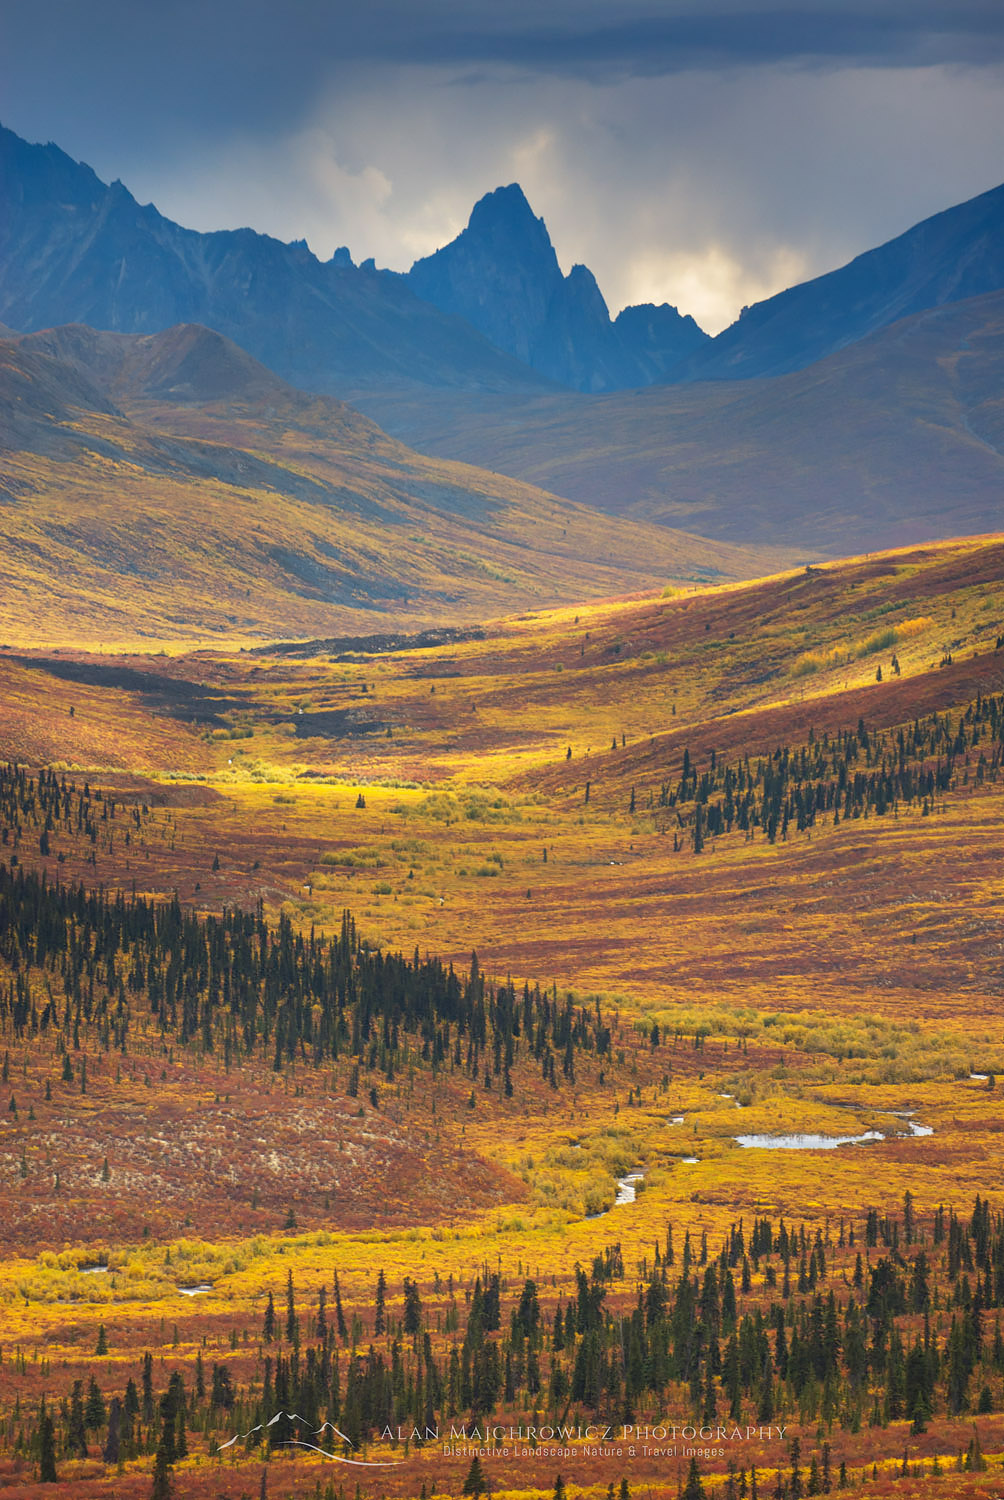 North Klondike River Valley displaying colors of autumn foliage, Tombstone Territorial Park Yukon Canada #15500